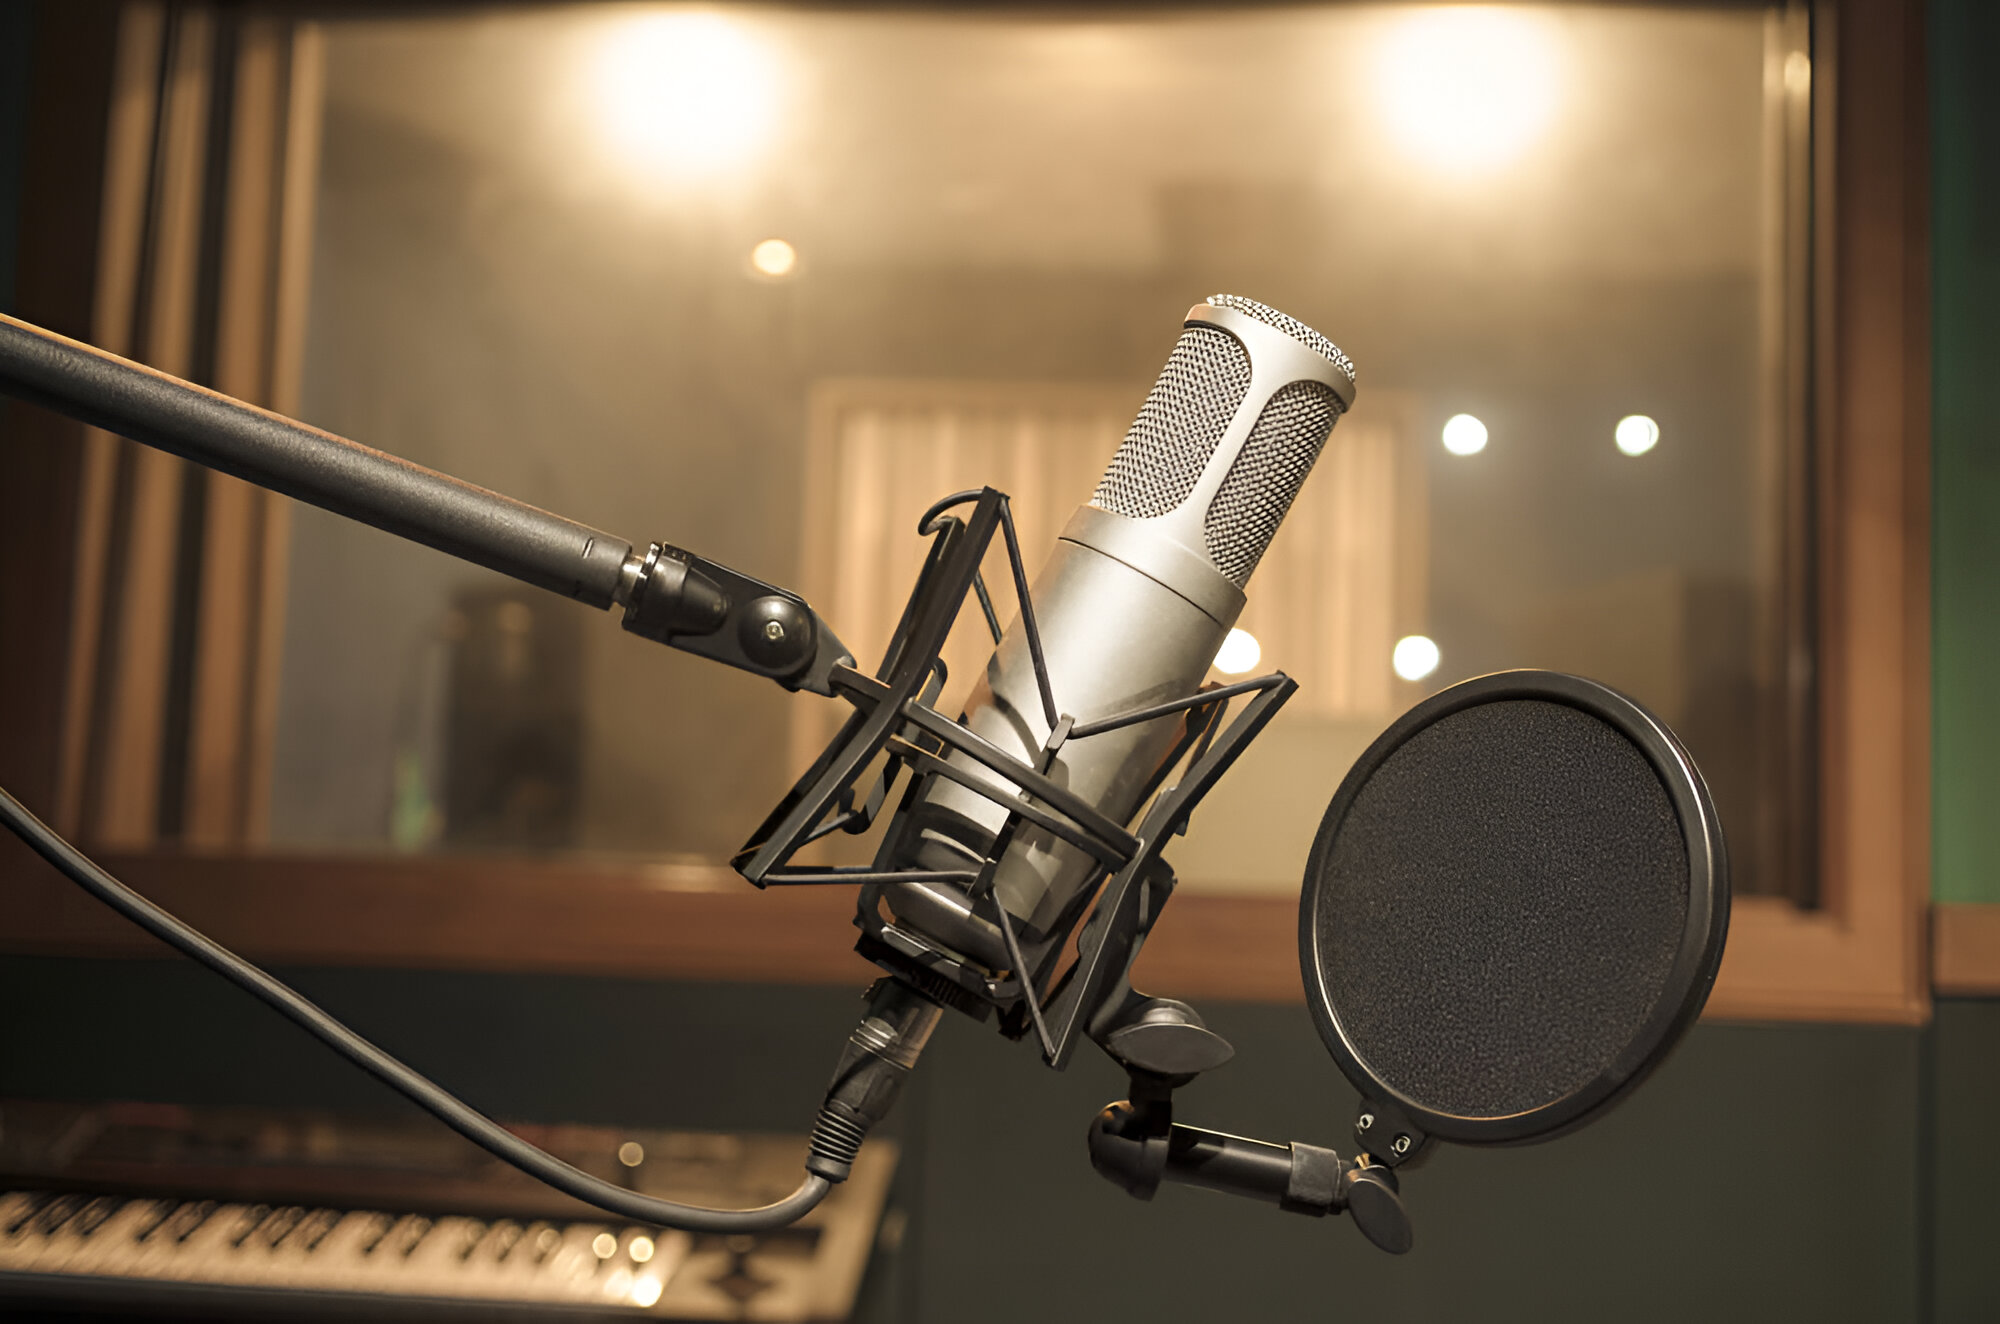 How Do I Test To See If A Condenser Microphone Is Working?